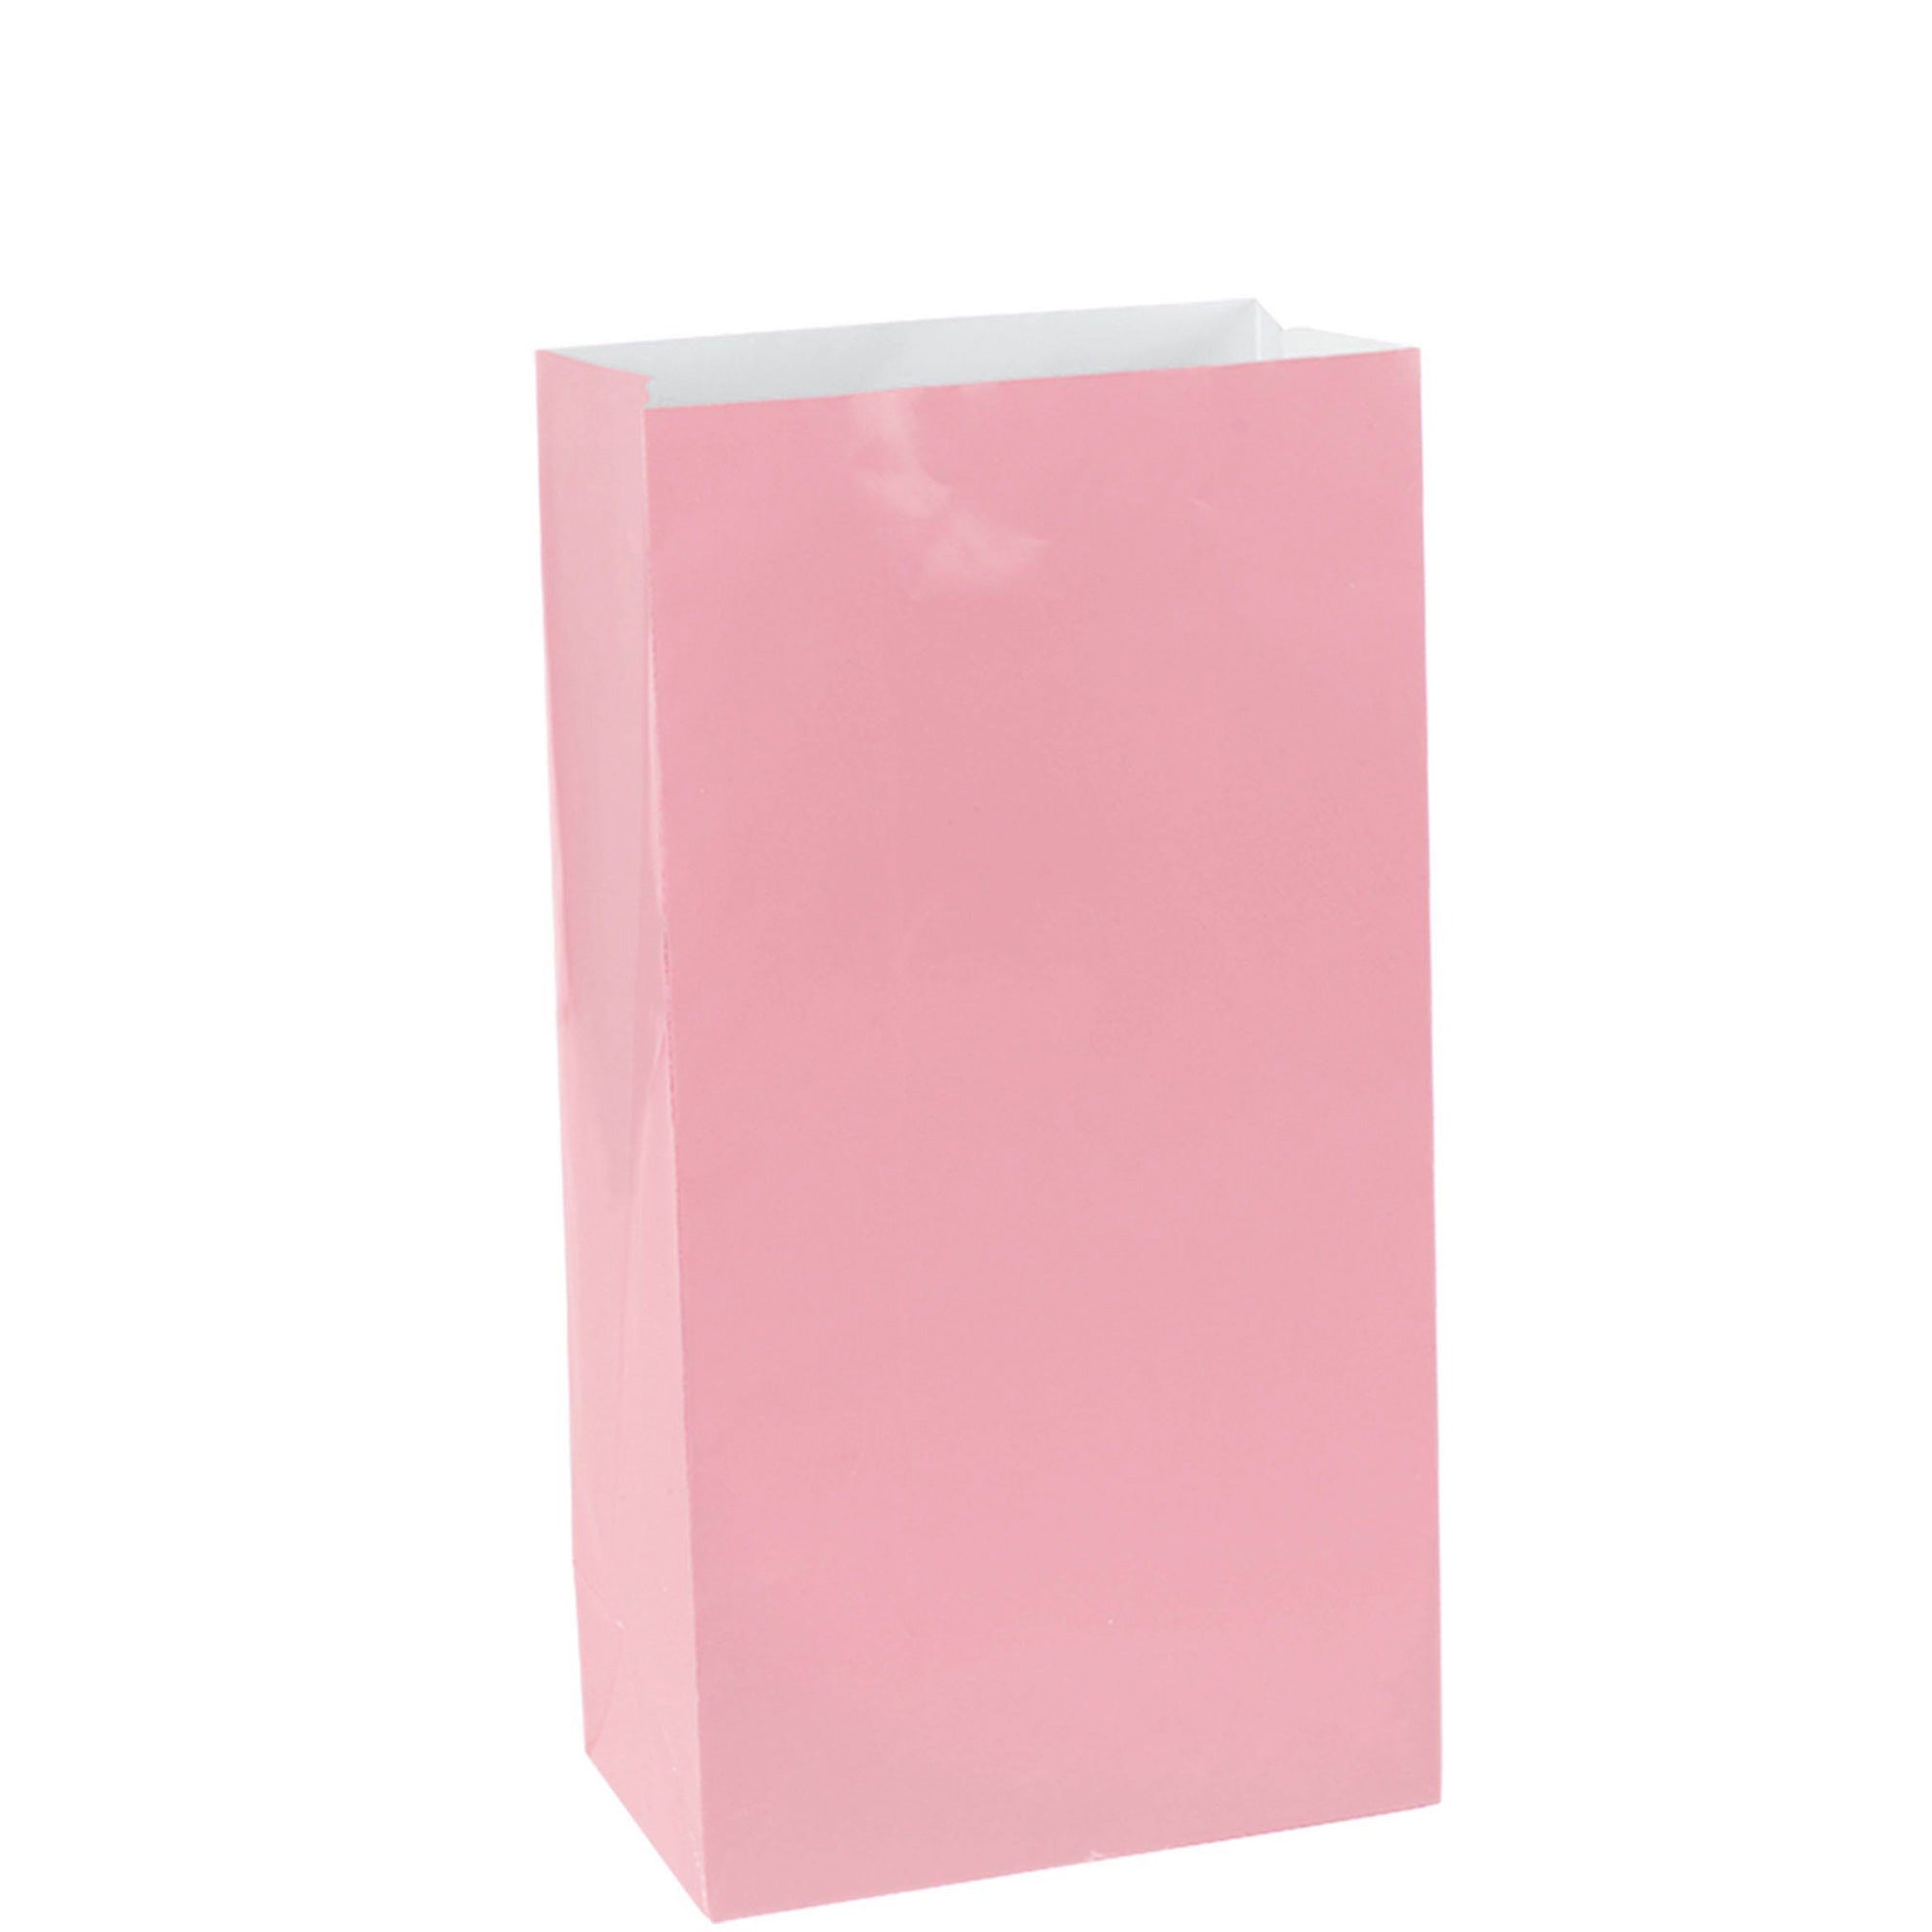 New Pink Mini Package Paper Bags 6in, 12pcs